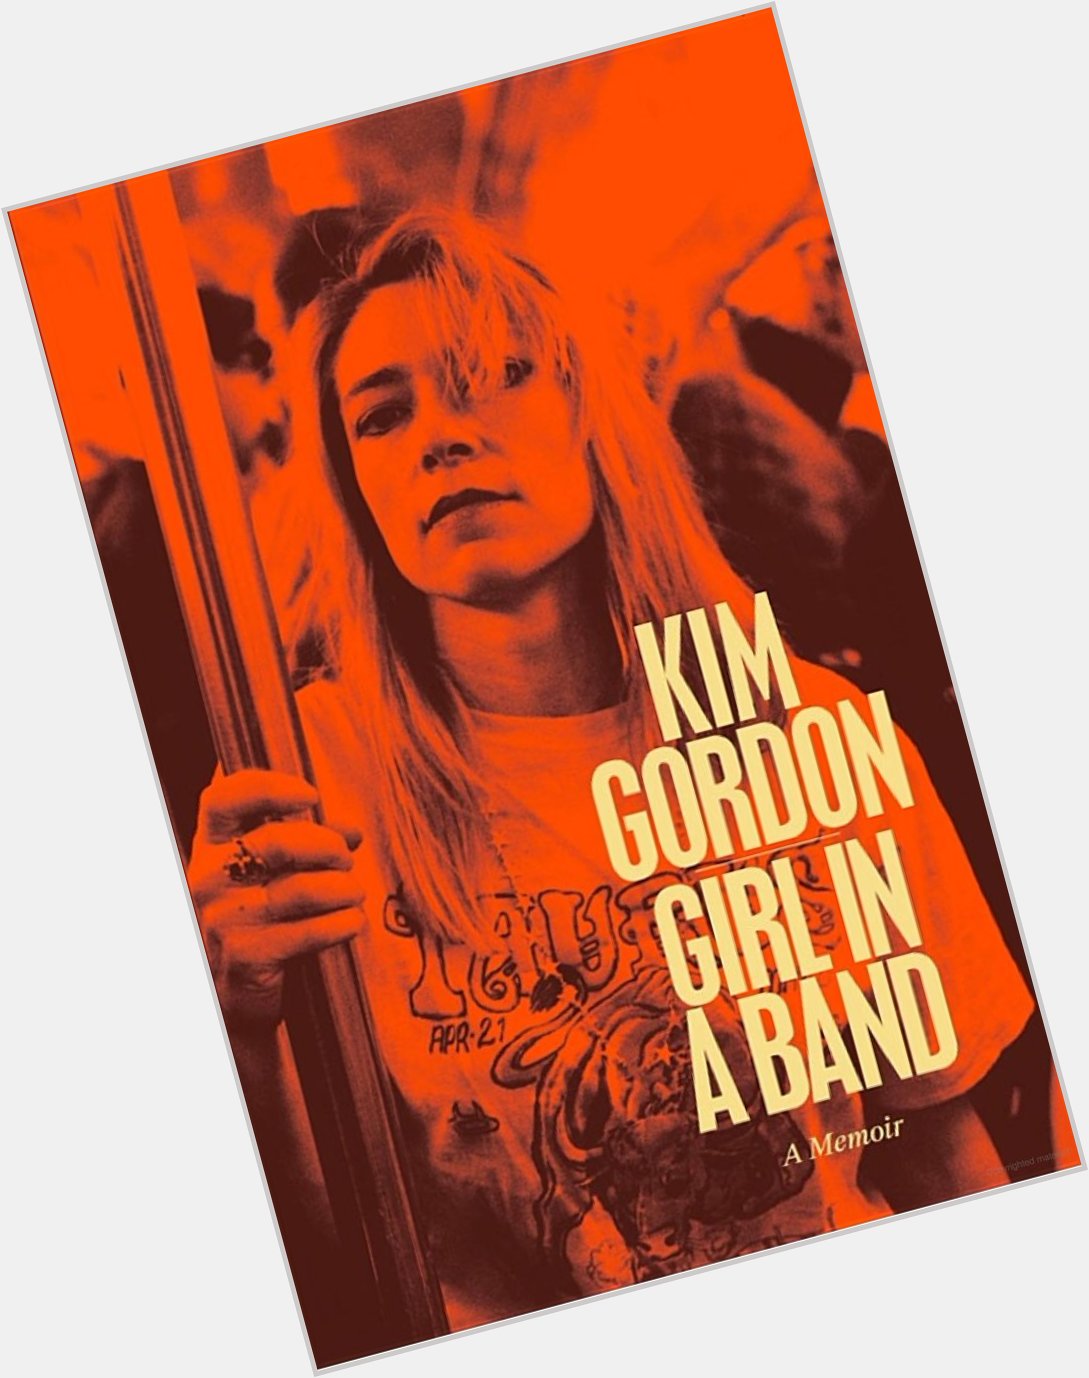 Happy birthday to former Sonic Youth legend Kim Gordon. This is one of the better memoirs out there. 